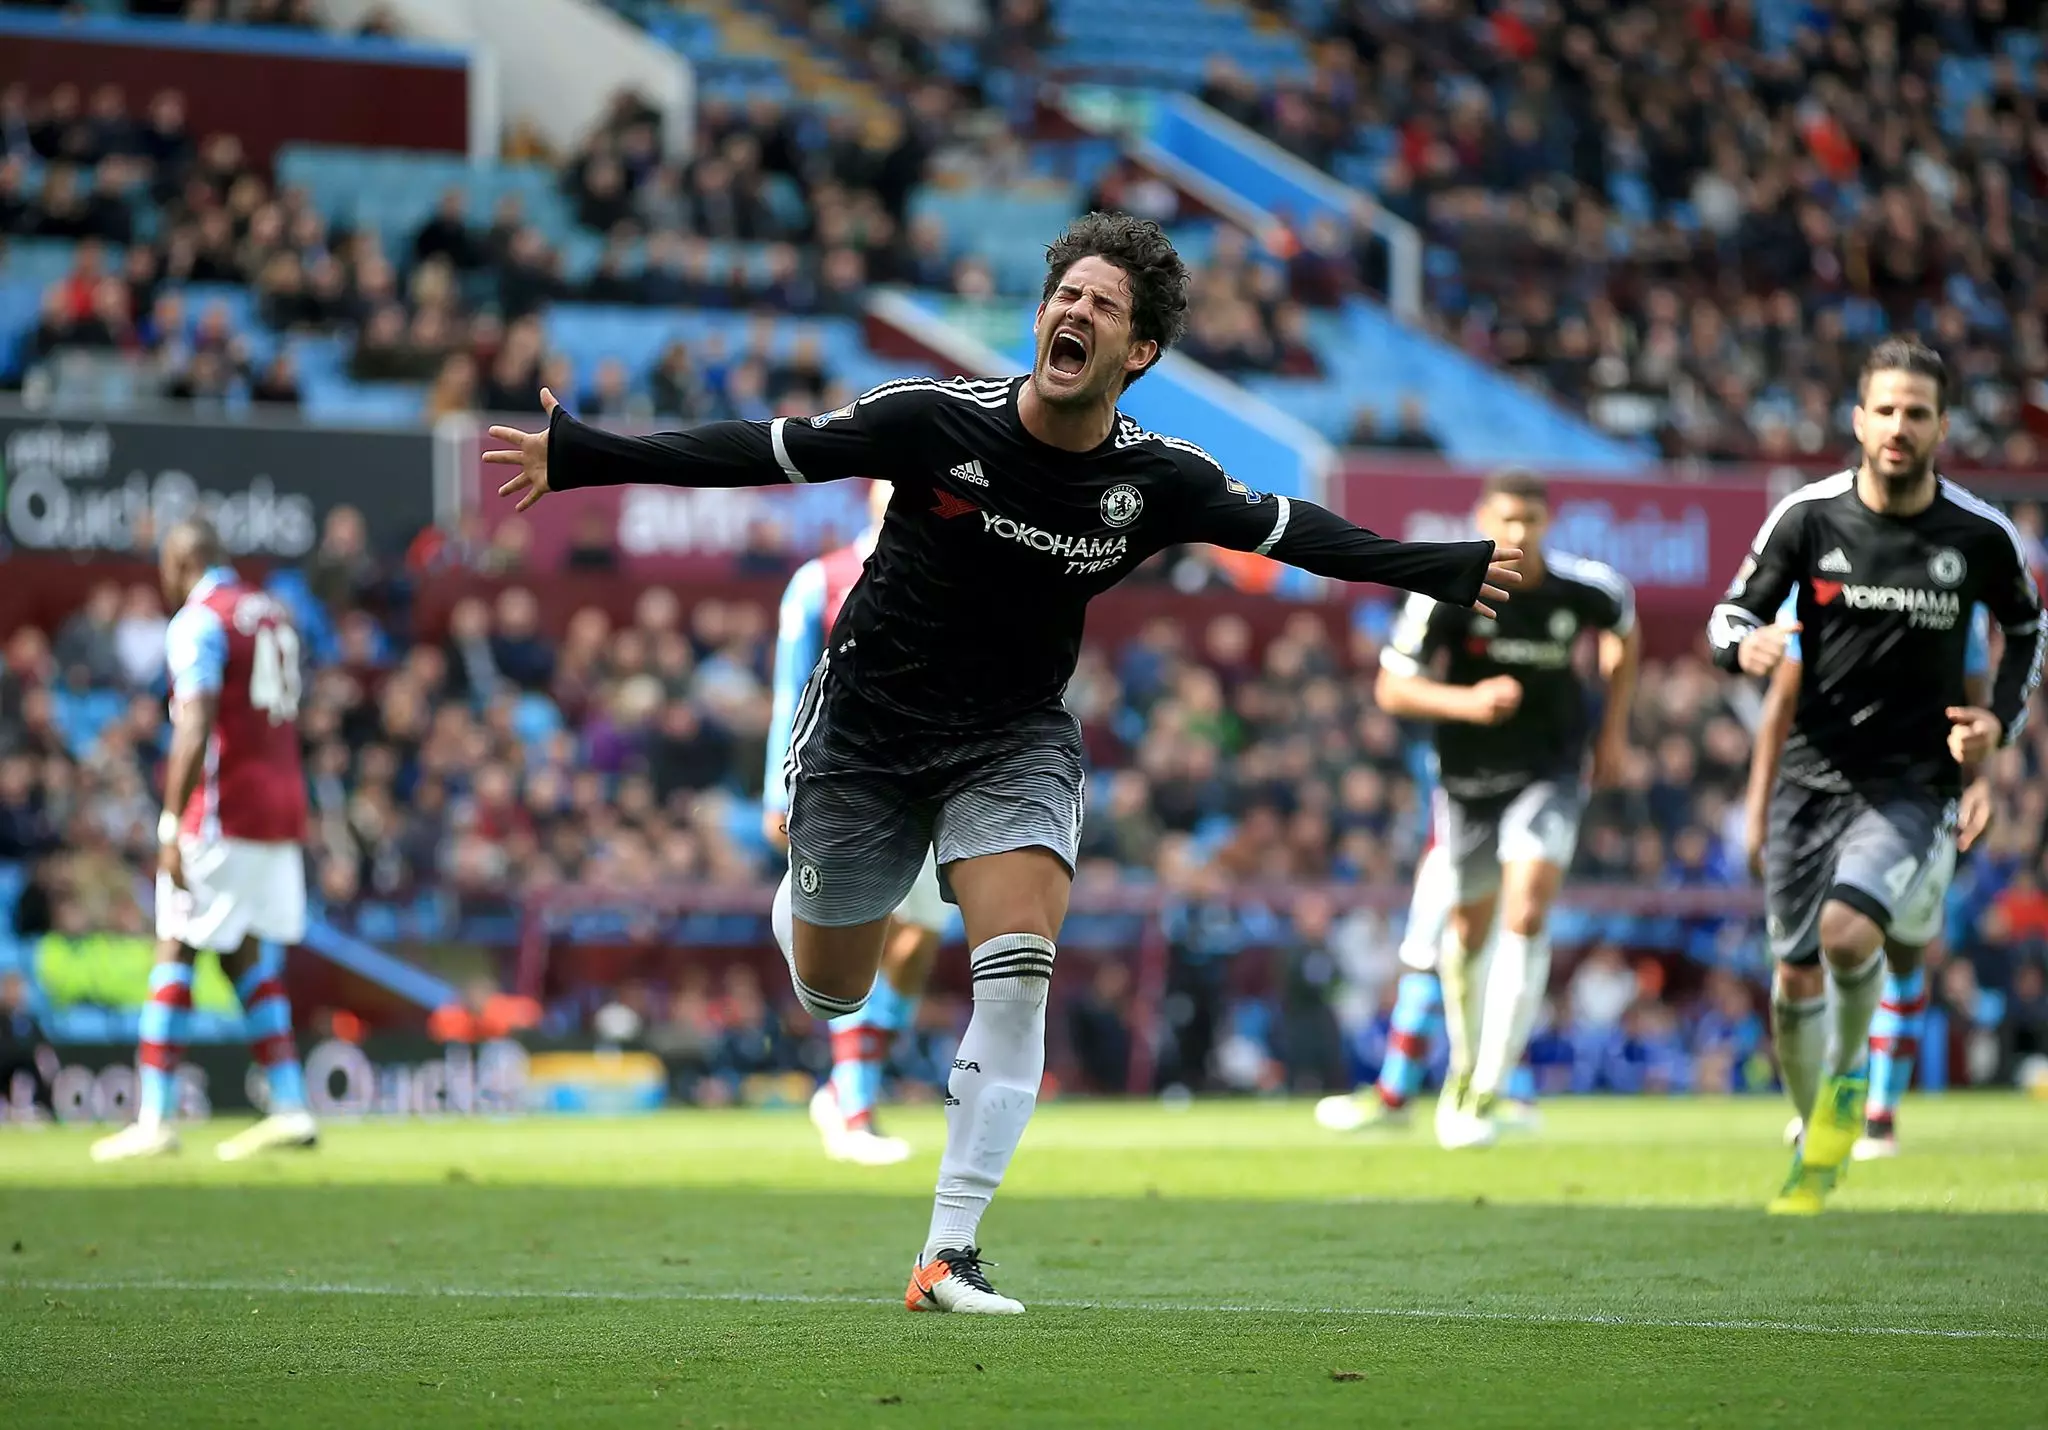 Pato scores a goal for Chelsea. Image: PA